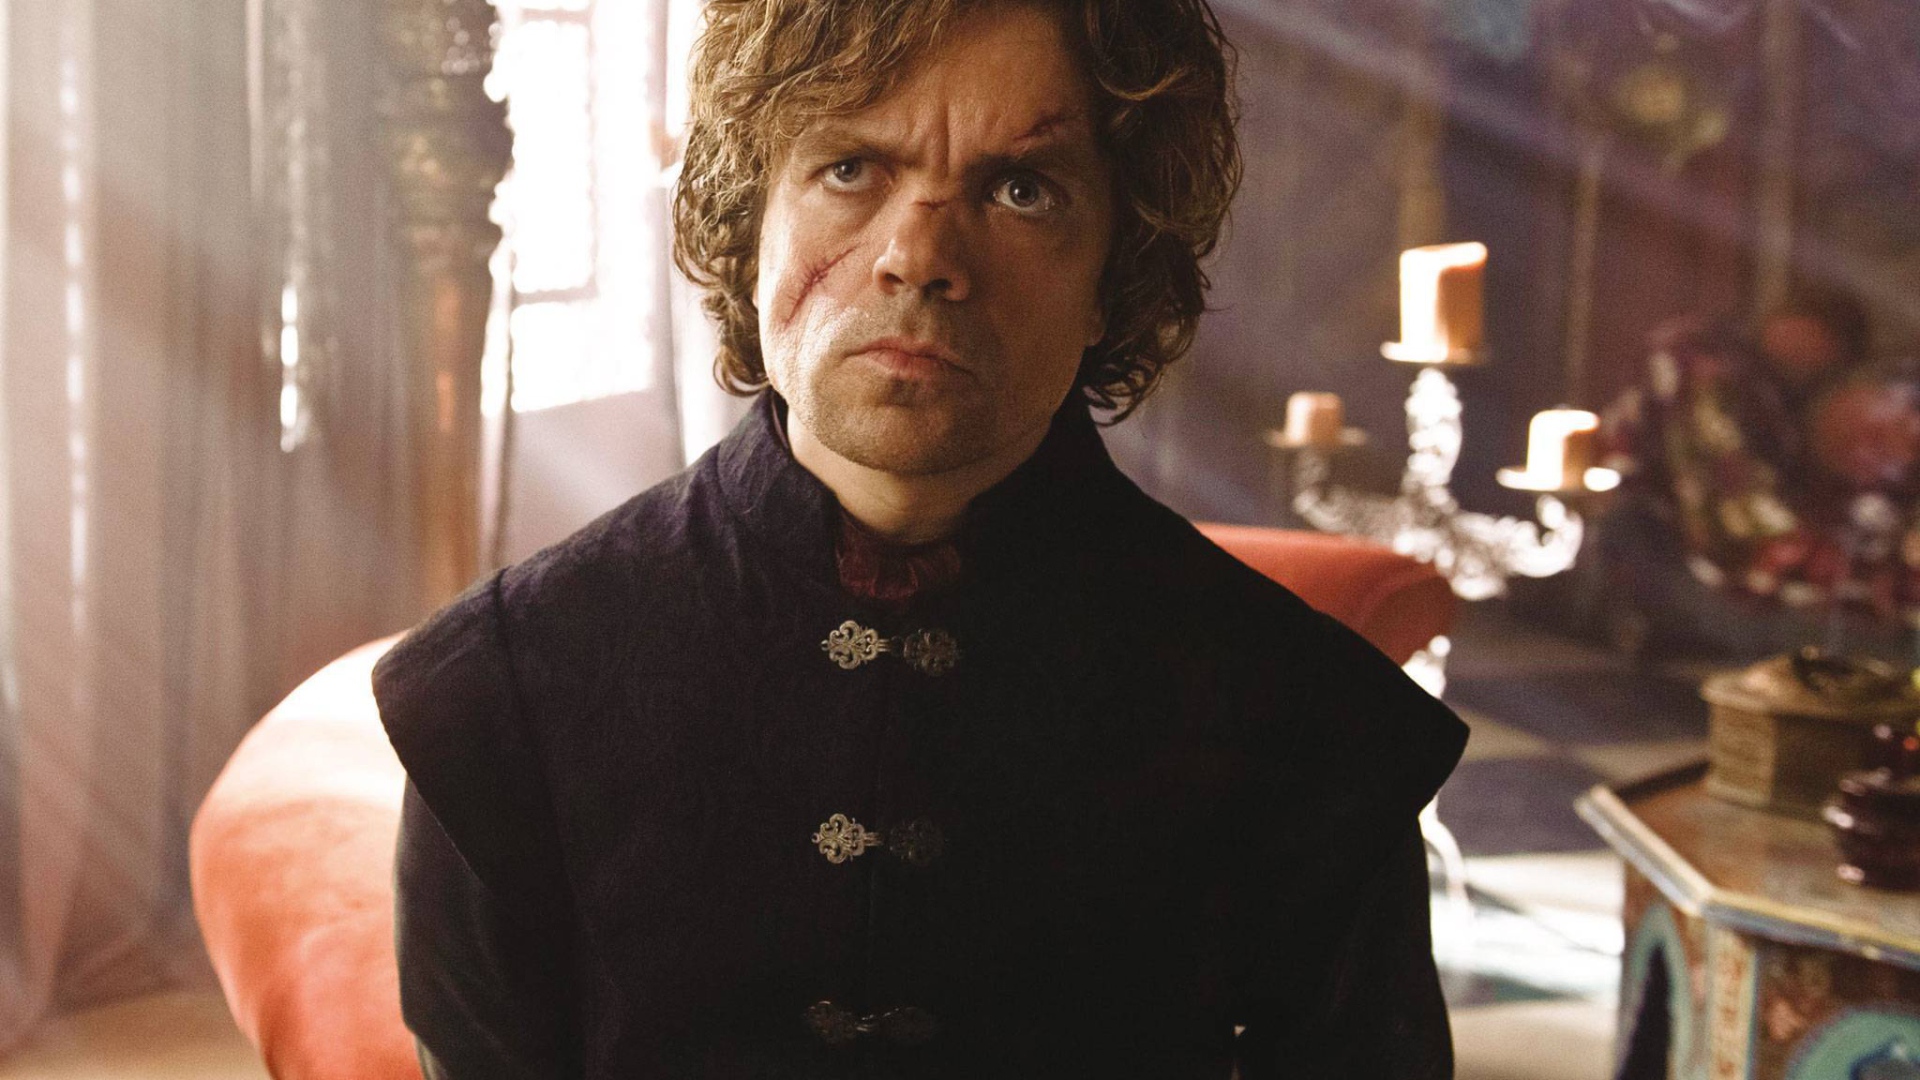 Peter Dinklage as Tyrion Lannister